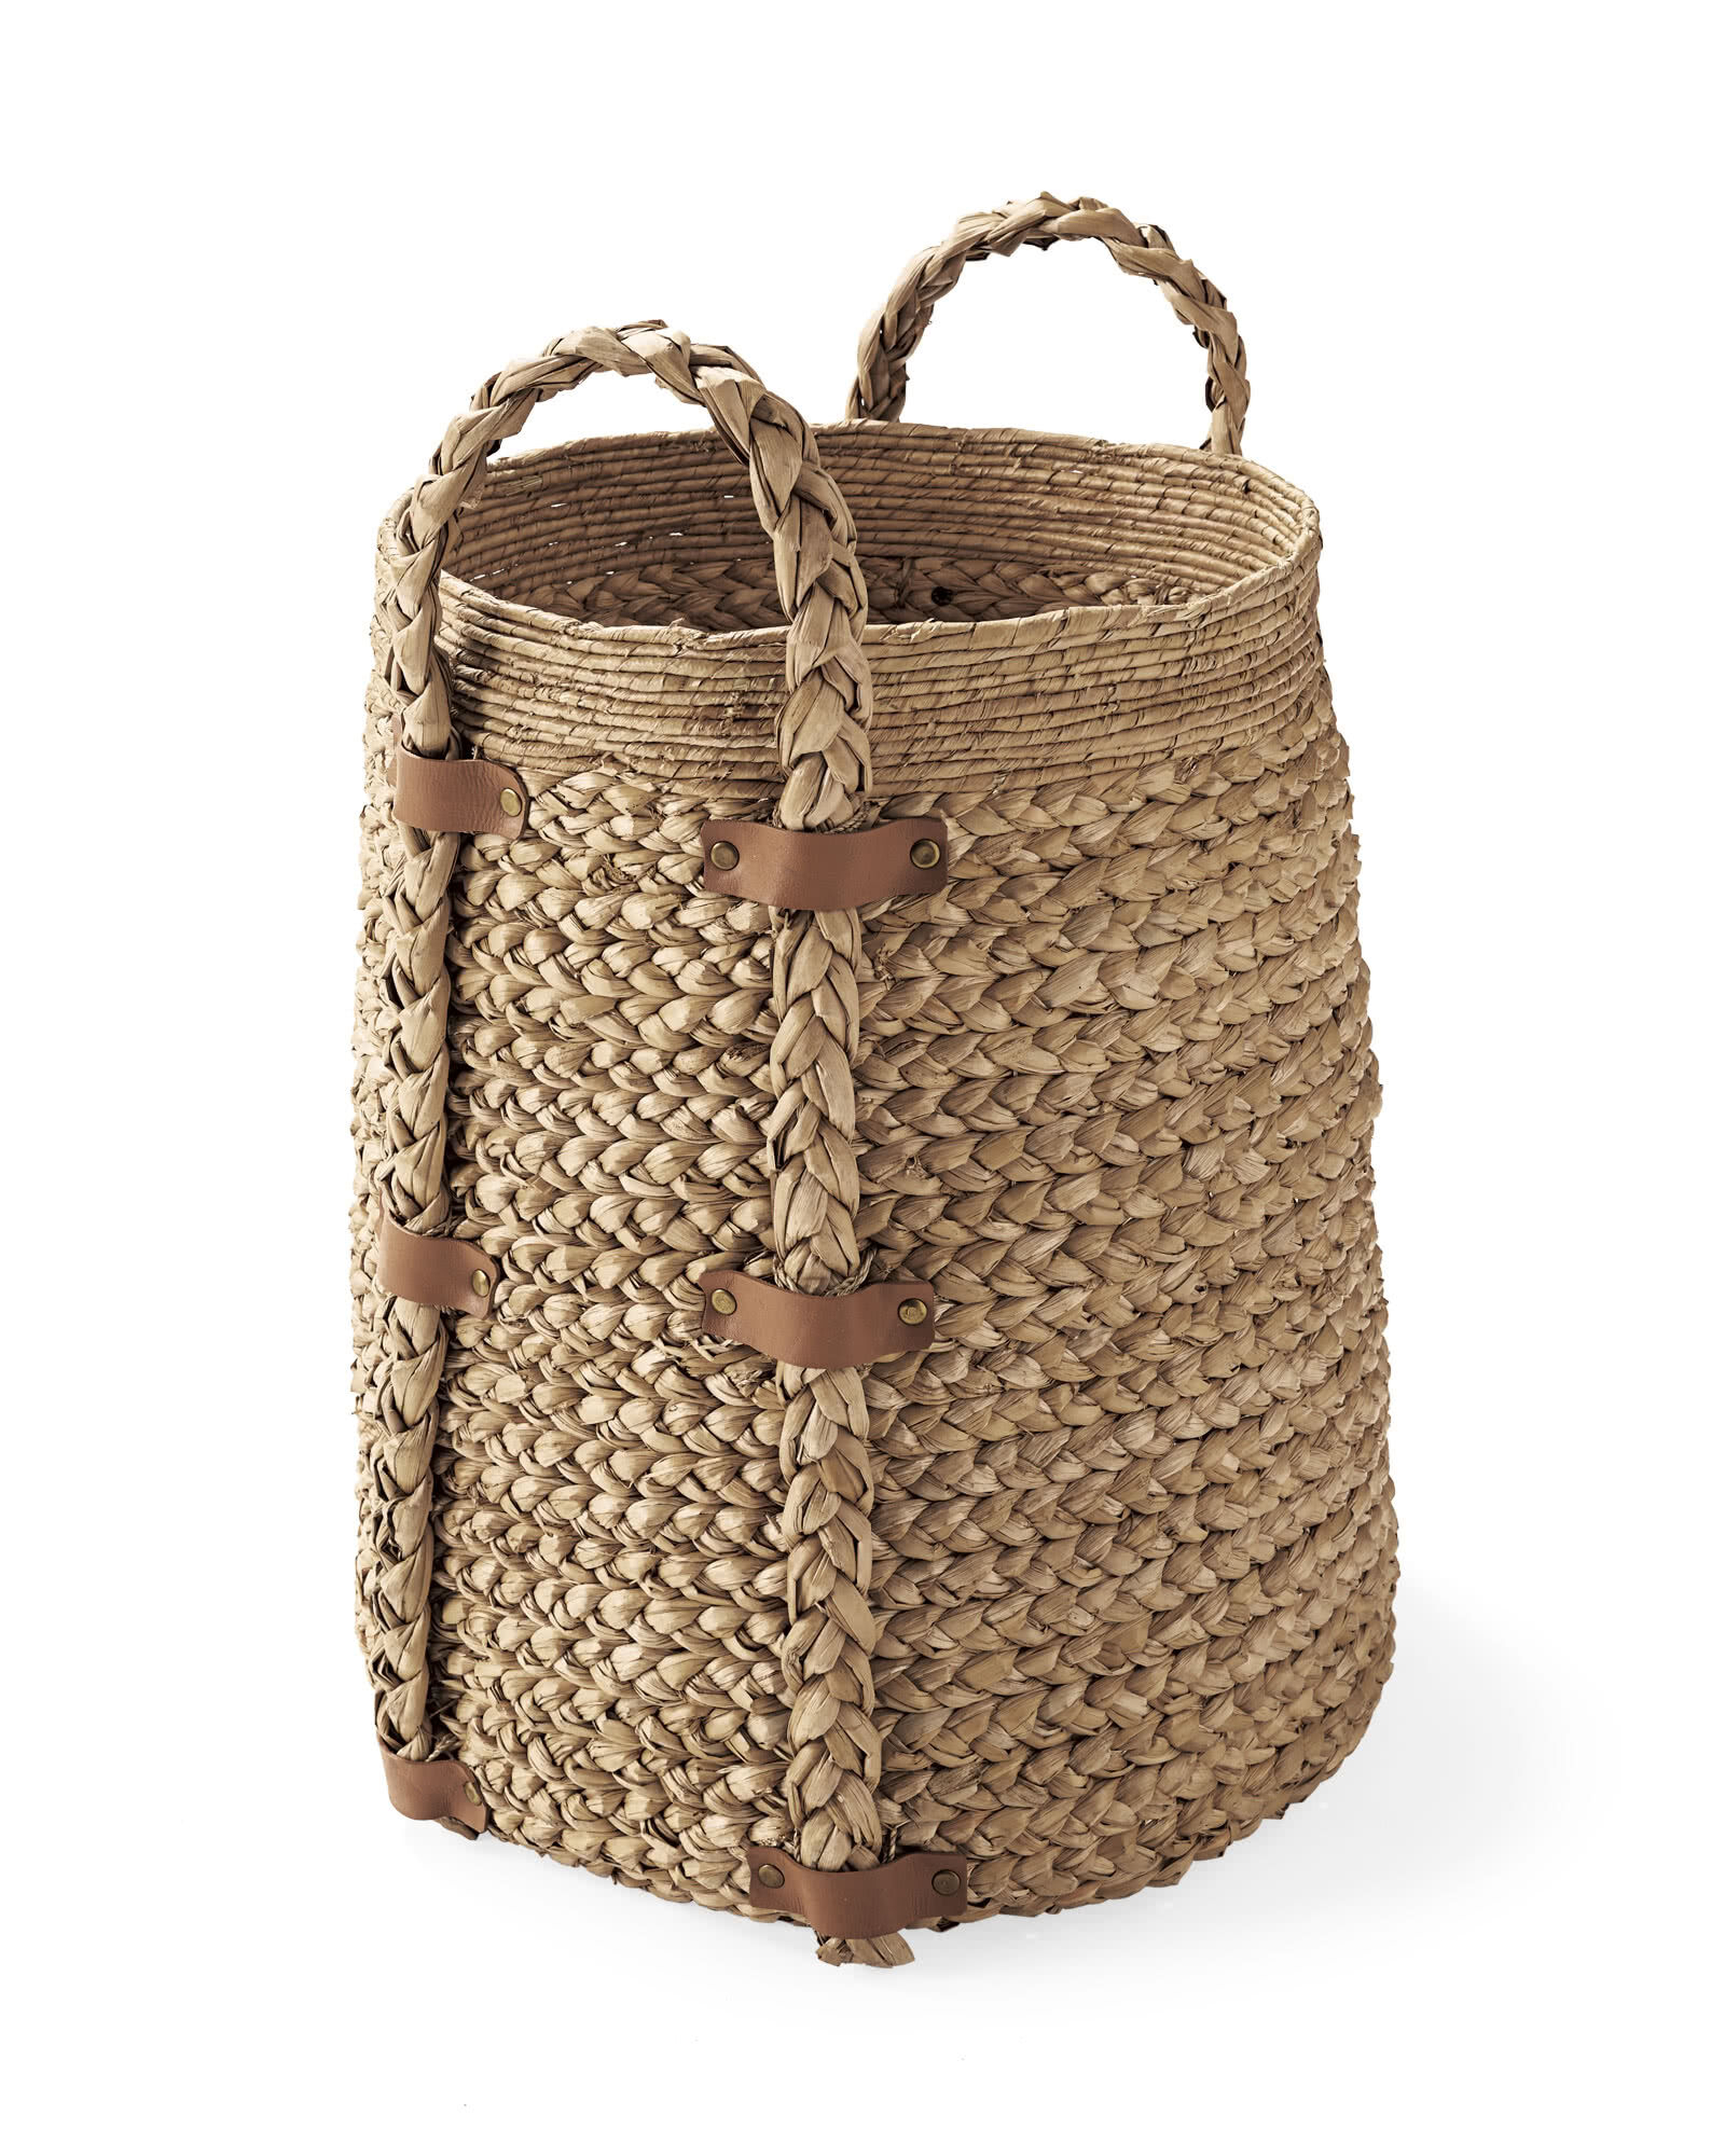 Olema Seagrass Baskets - XL - Serena and Lily